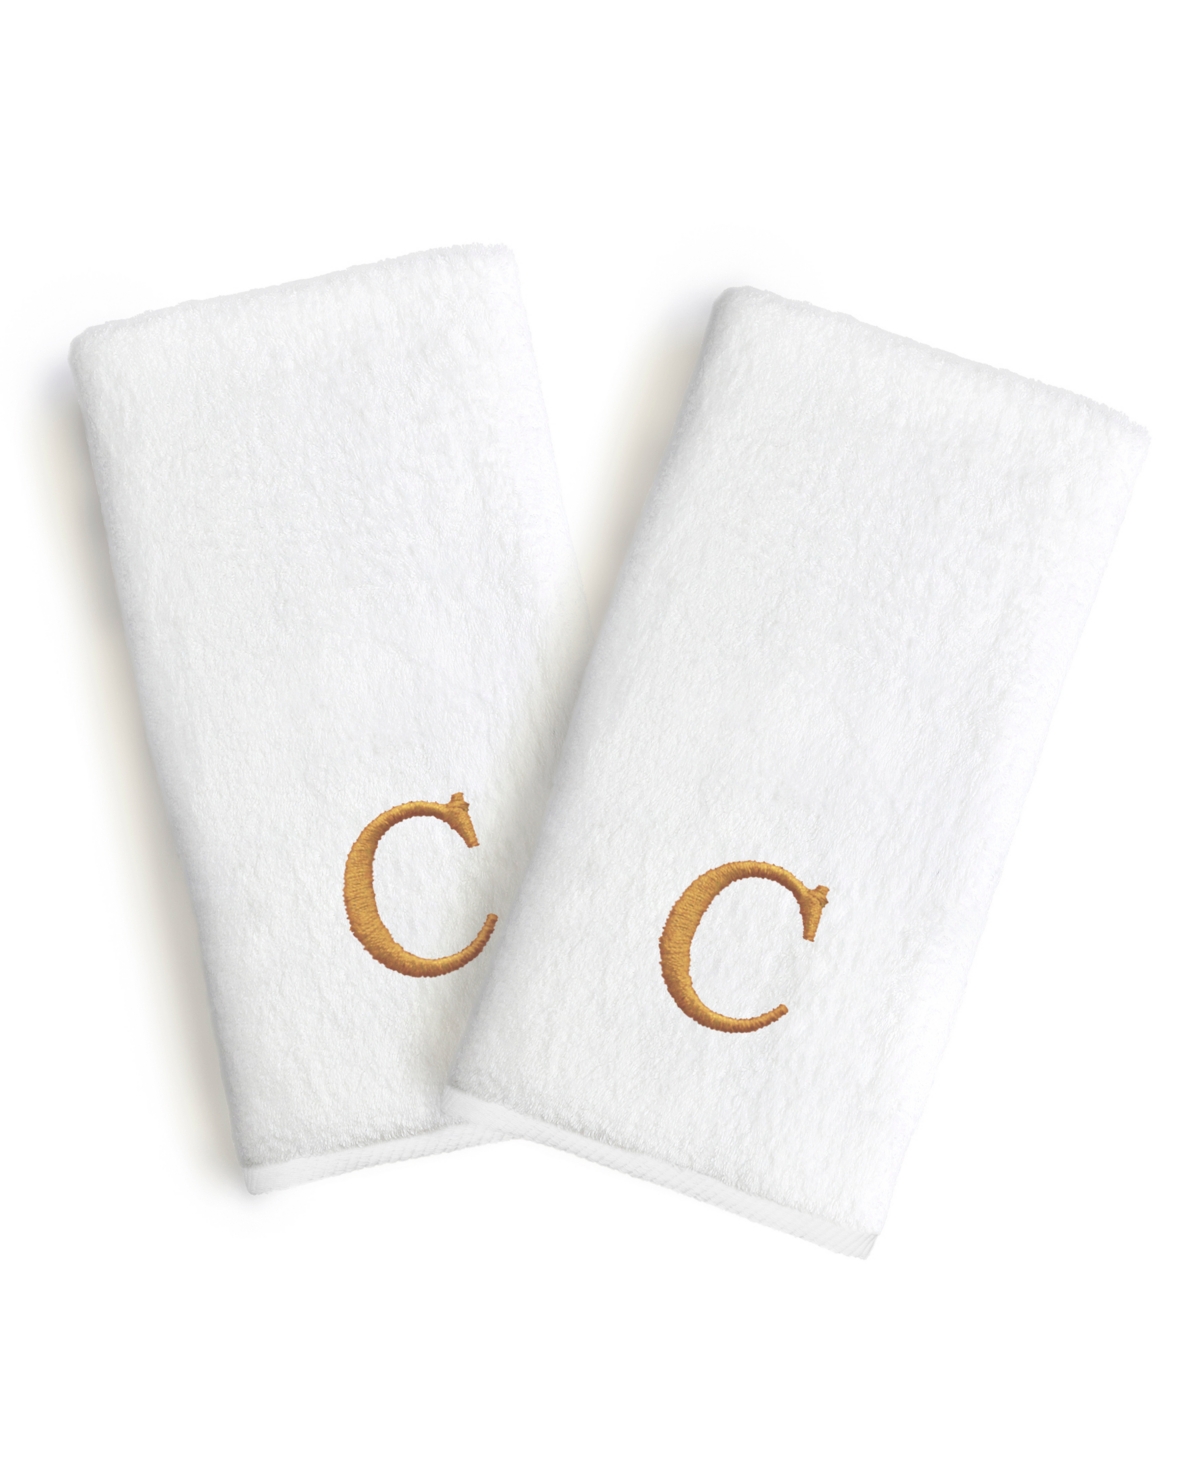 Linum Home Bookman Gold Font Monogrammed Luxury 100% Turkish Cotton Novelty 2-piece Hand Towels, 16" X 30" In Gold - C